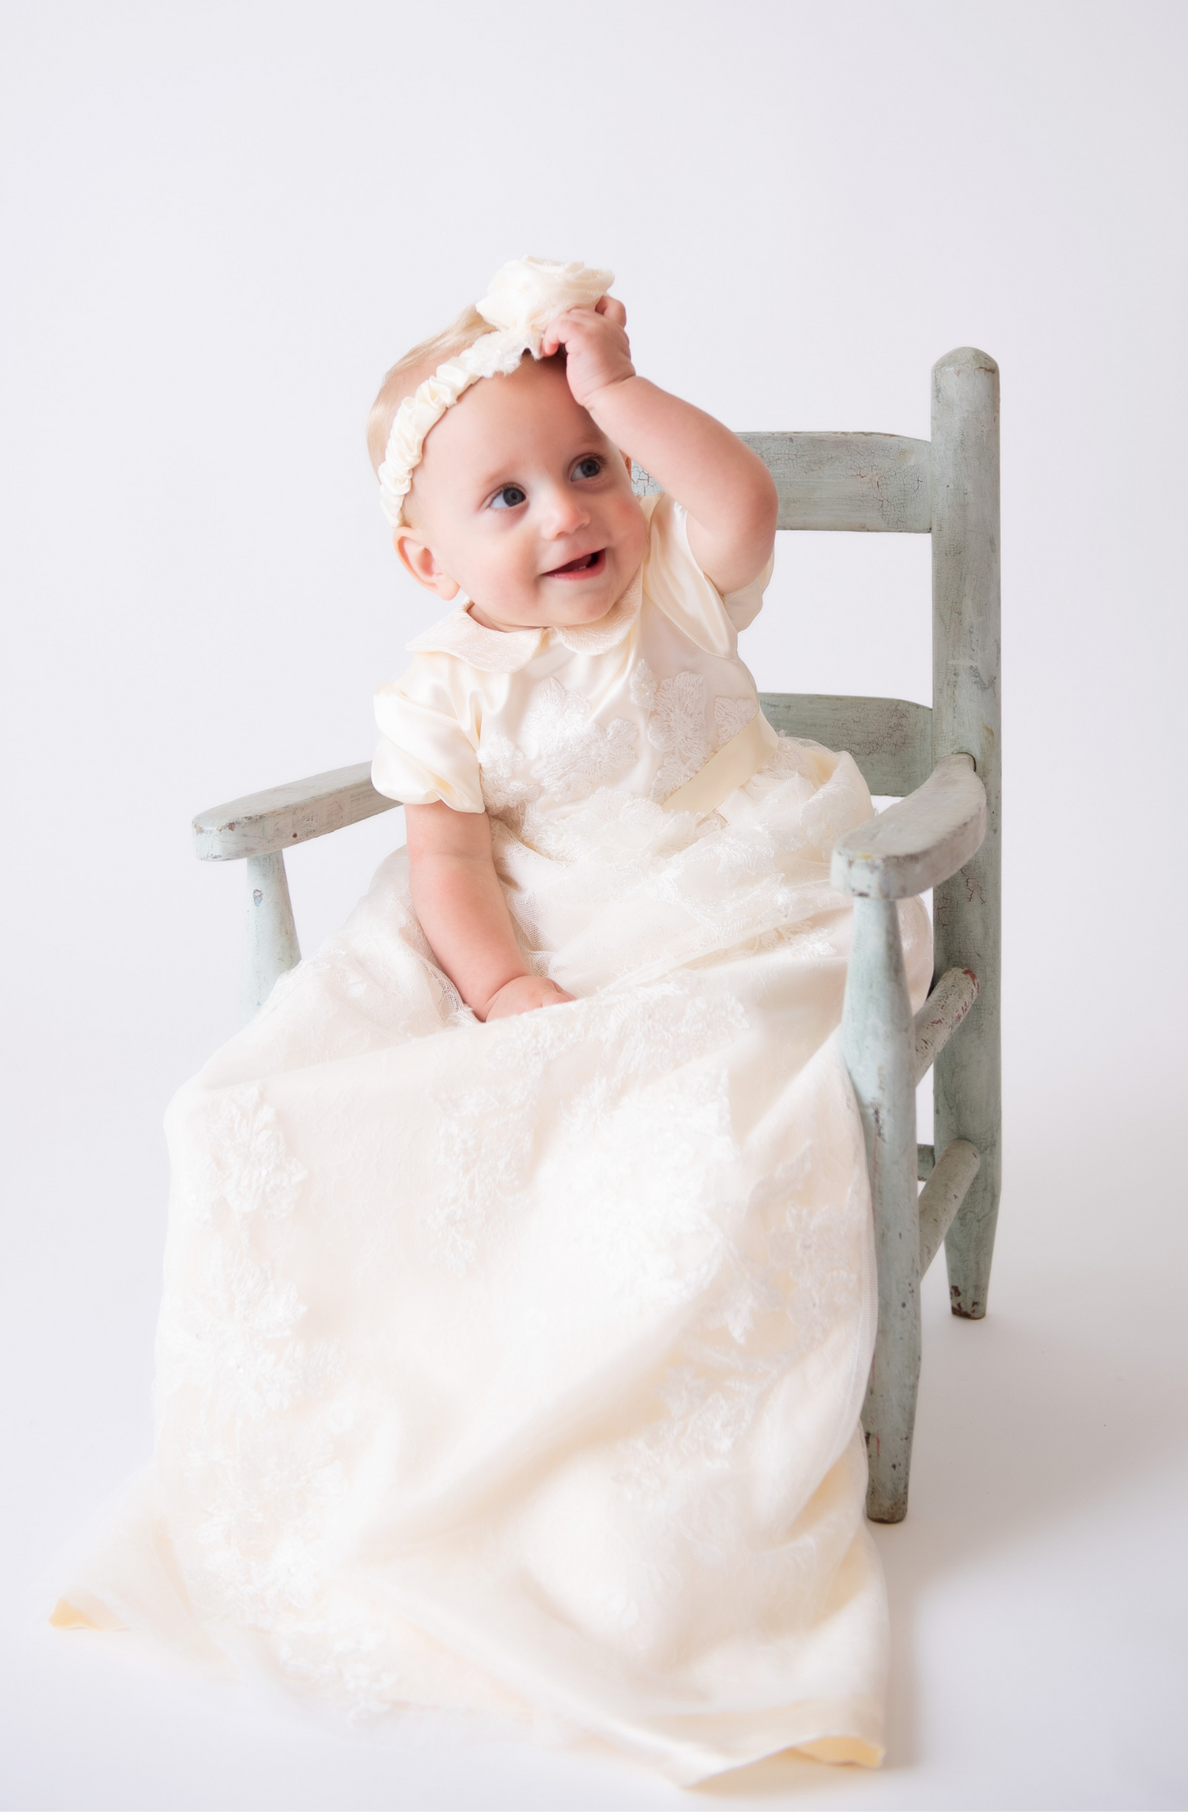 Cotton Bloom Clothing  Let Them Be Little, A Baby & Children's Clothing  Boutique